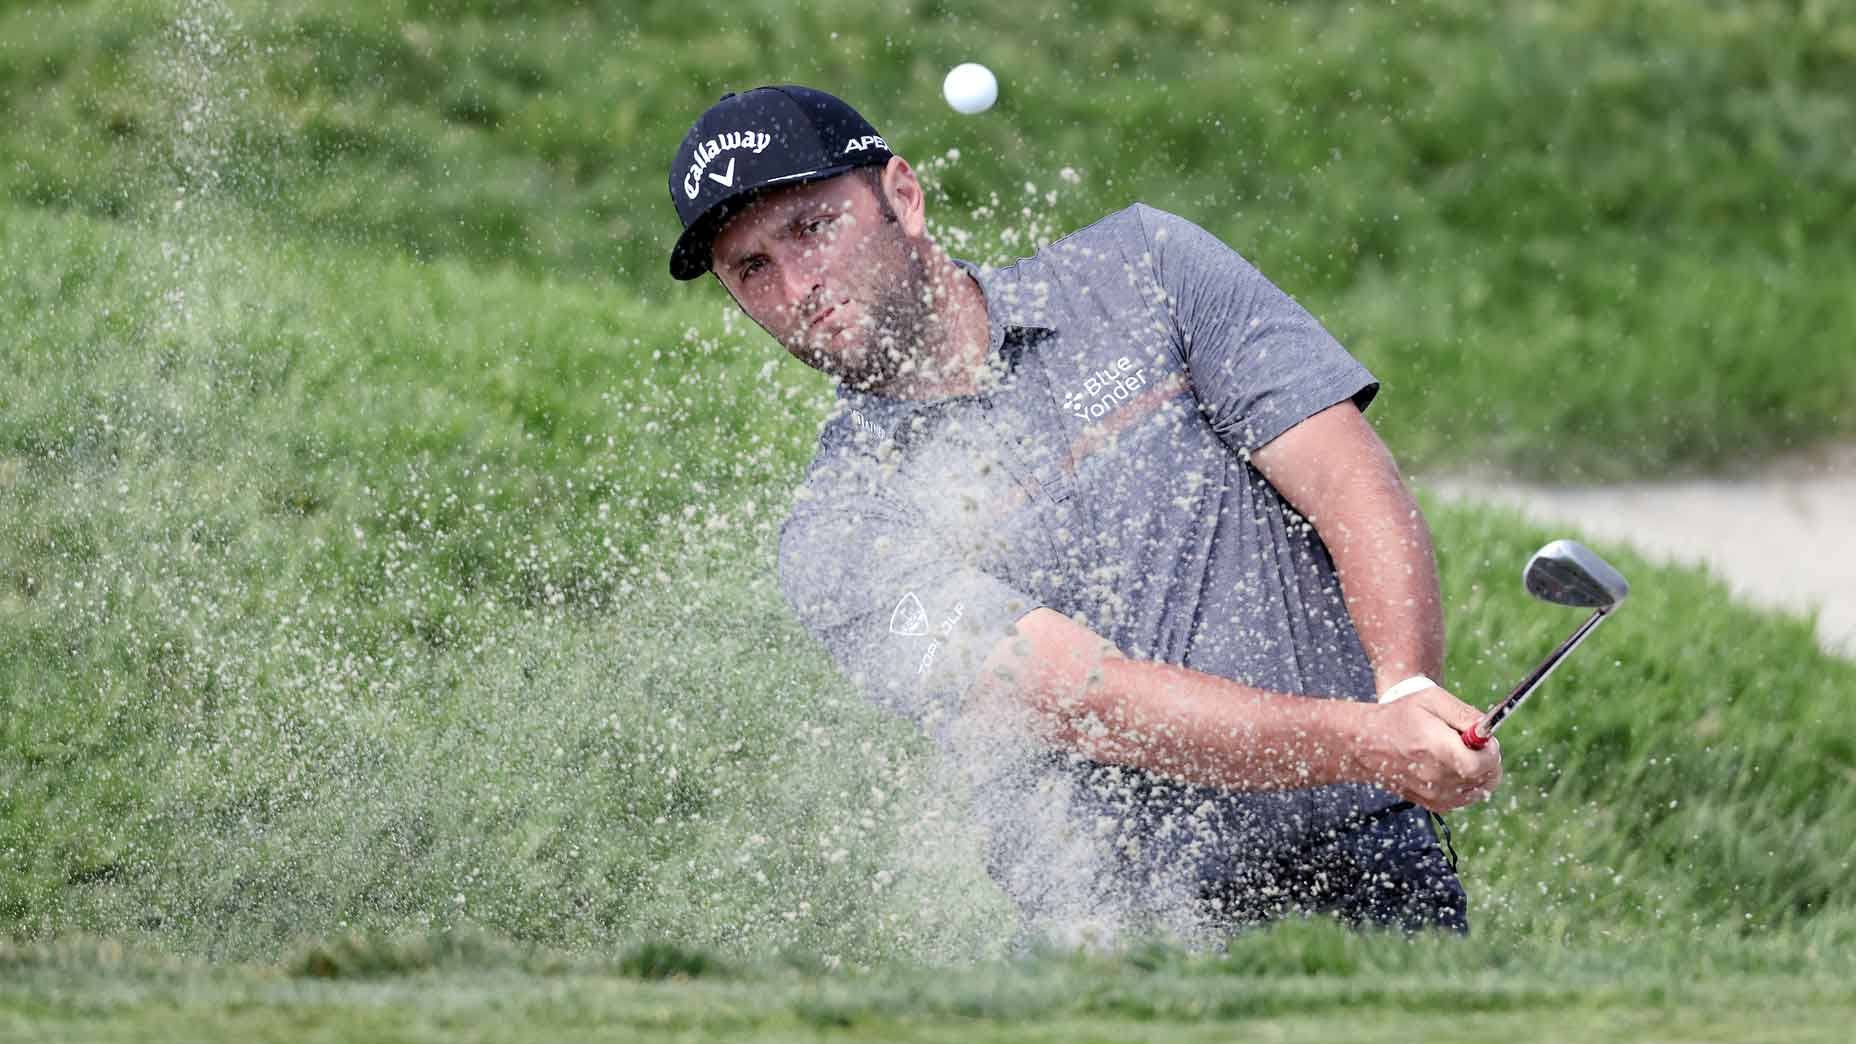 Tour Confidential: What stood out most on Day 1 of the U.S. Open?